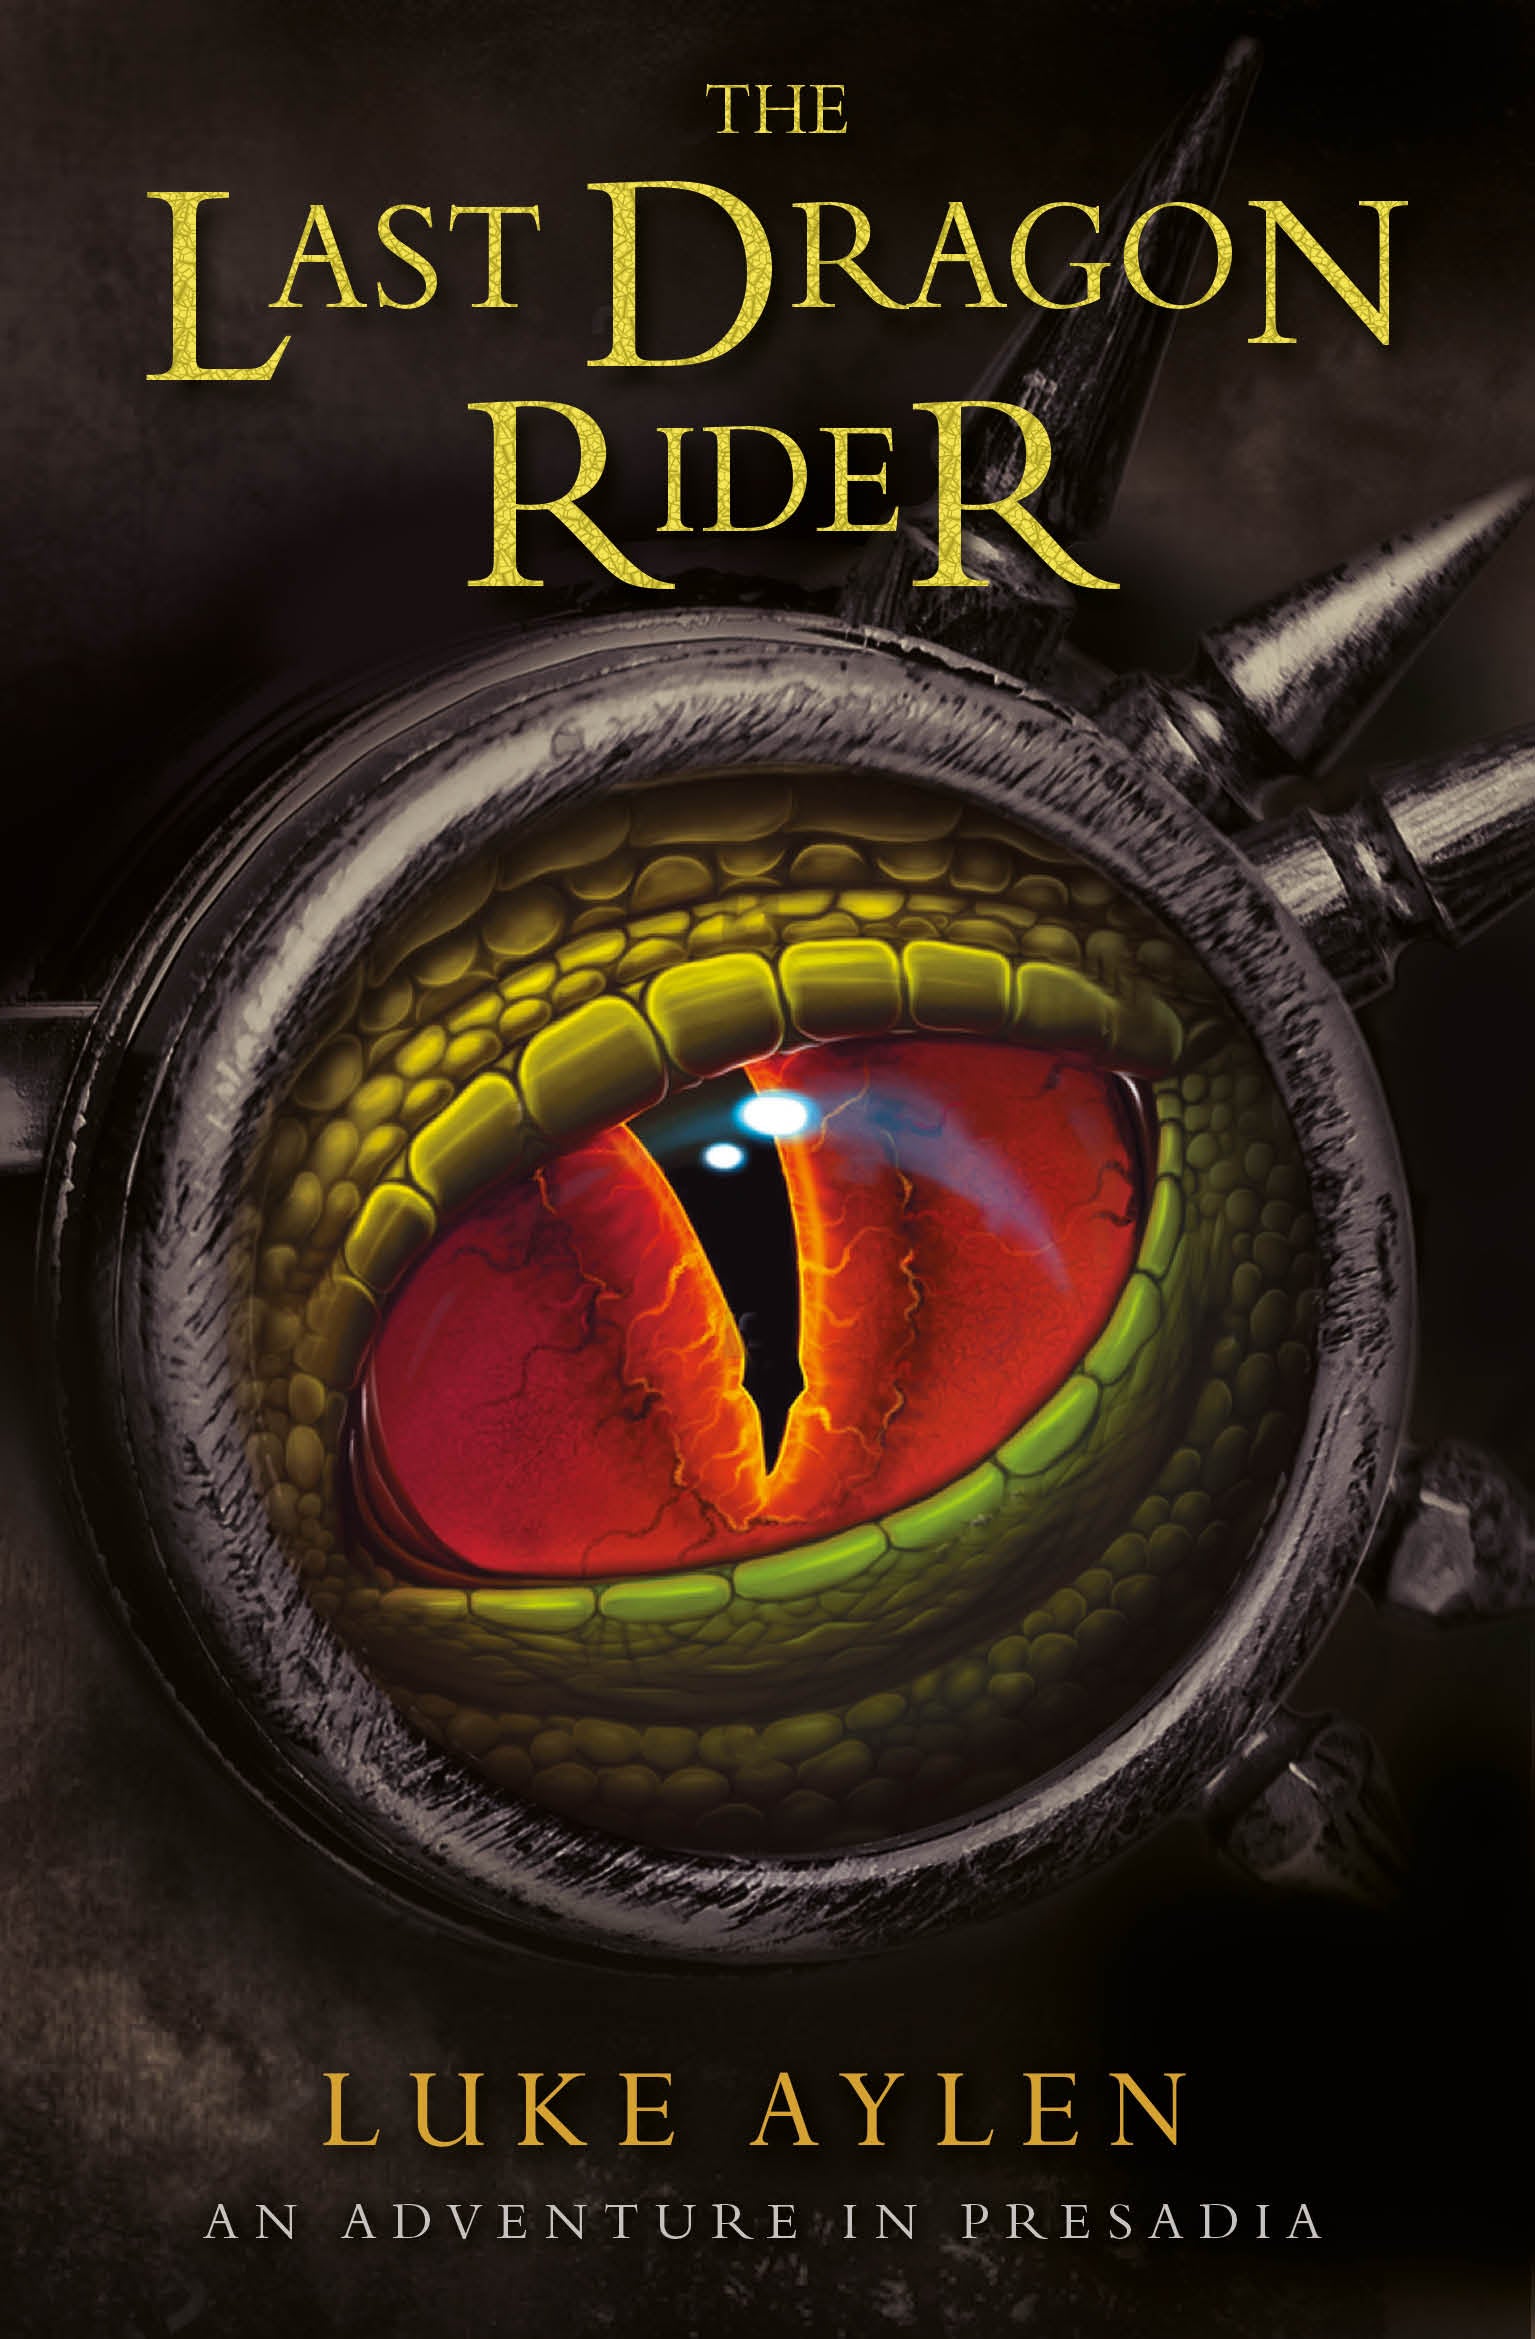 Image of The Last Dragon Rider other